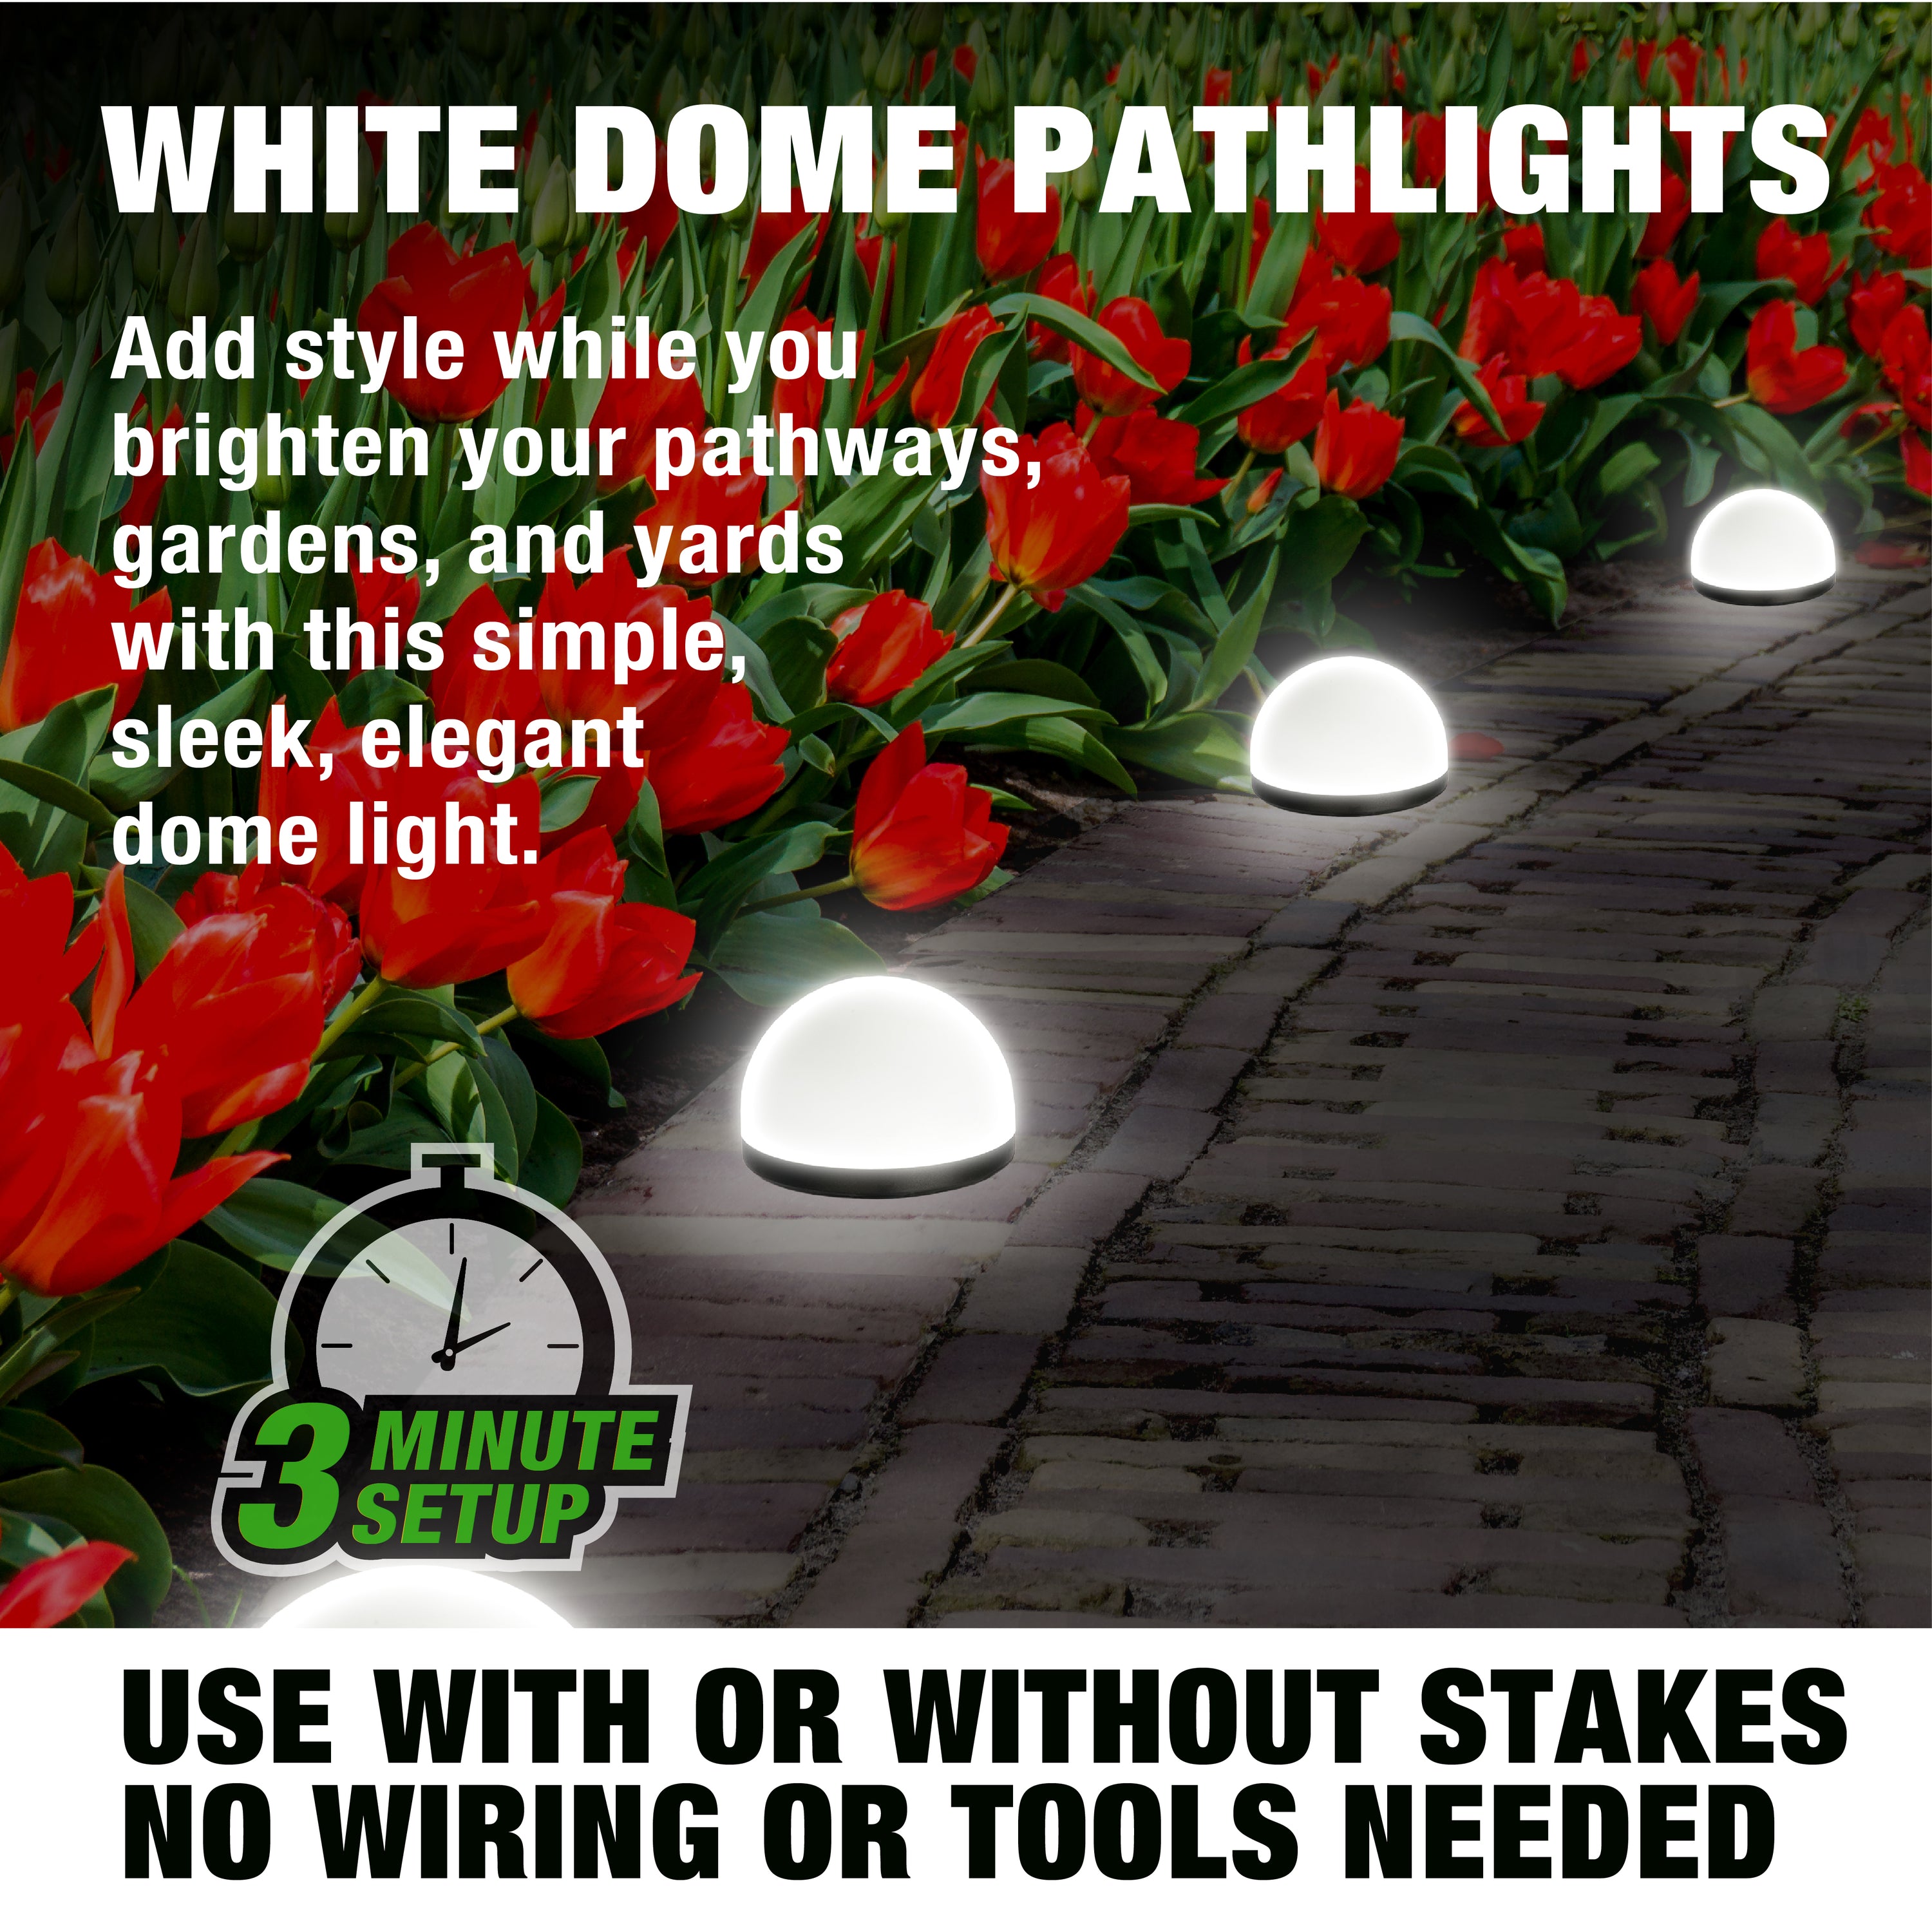 Bell + Howell Solar Pathway Dome Lights - 4 Pack